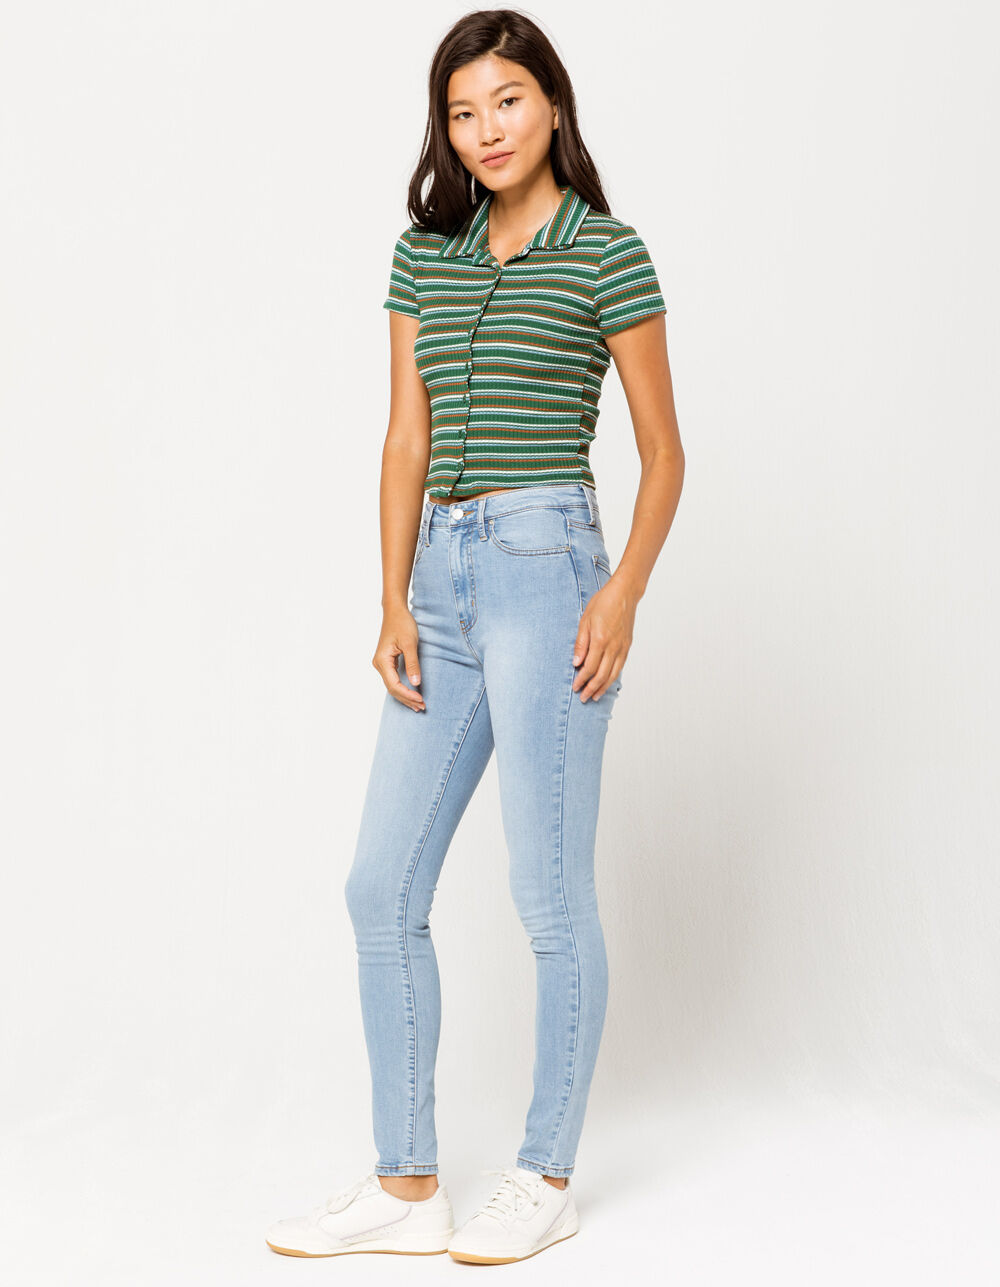 SKY AND SPARROW Stripe Button Front Womens Polo Shirt - HUNTER | Tillys